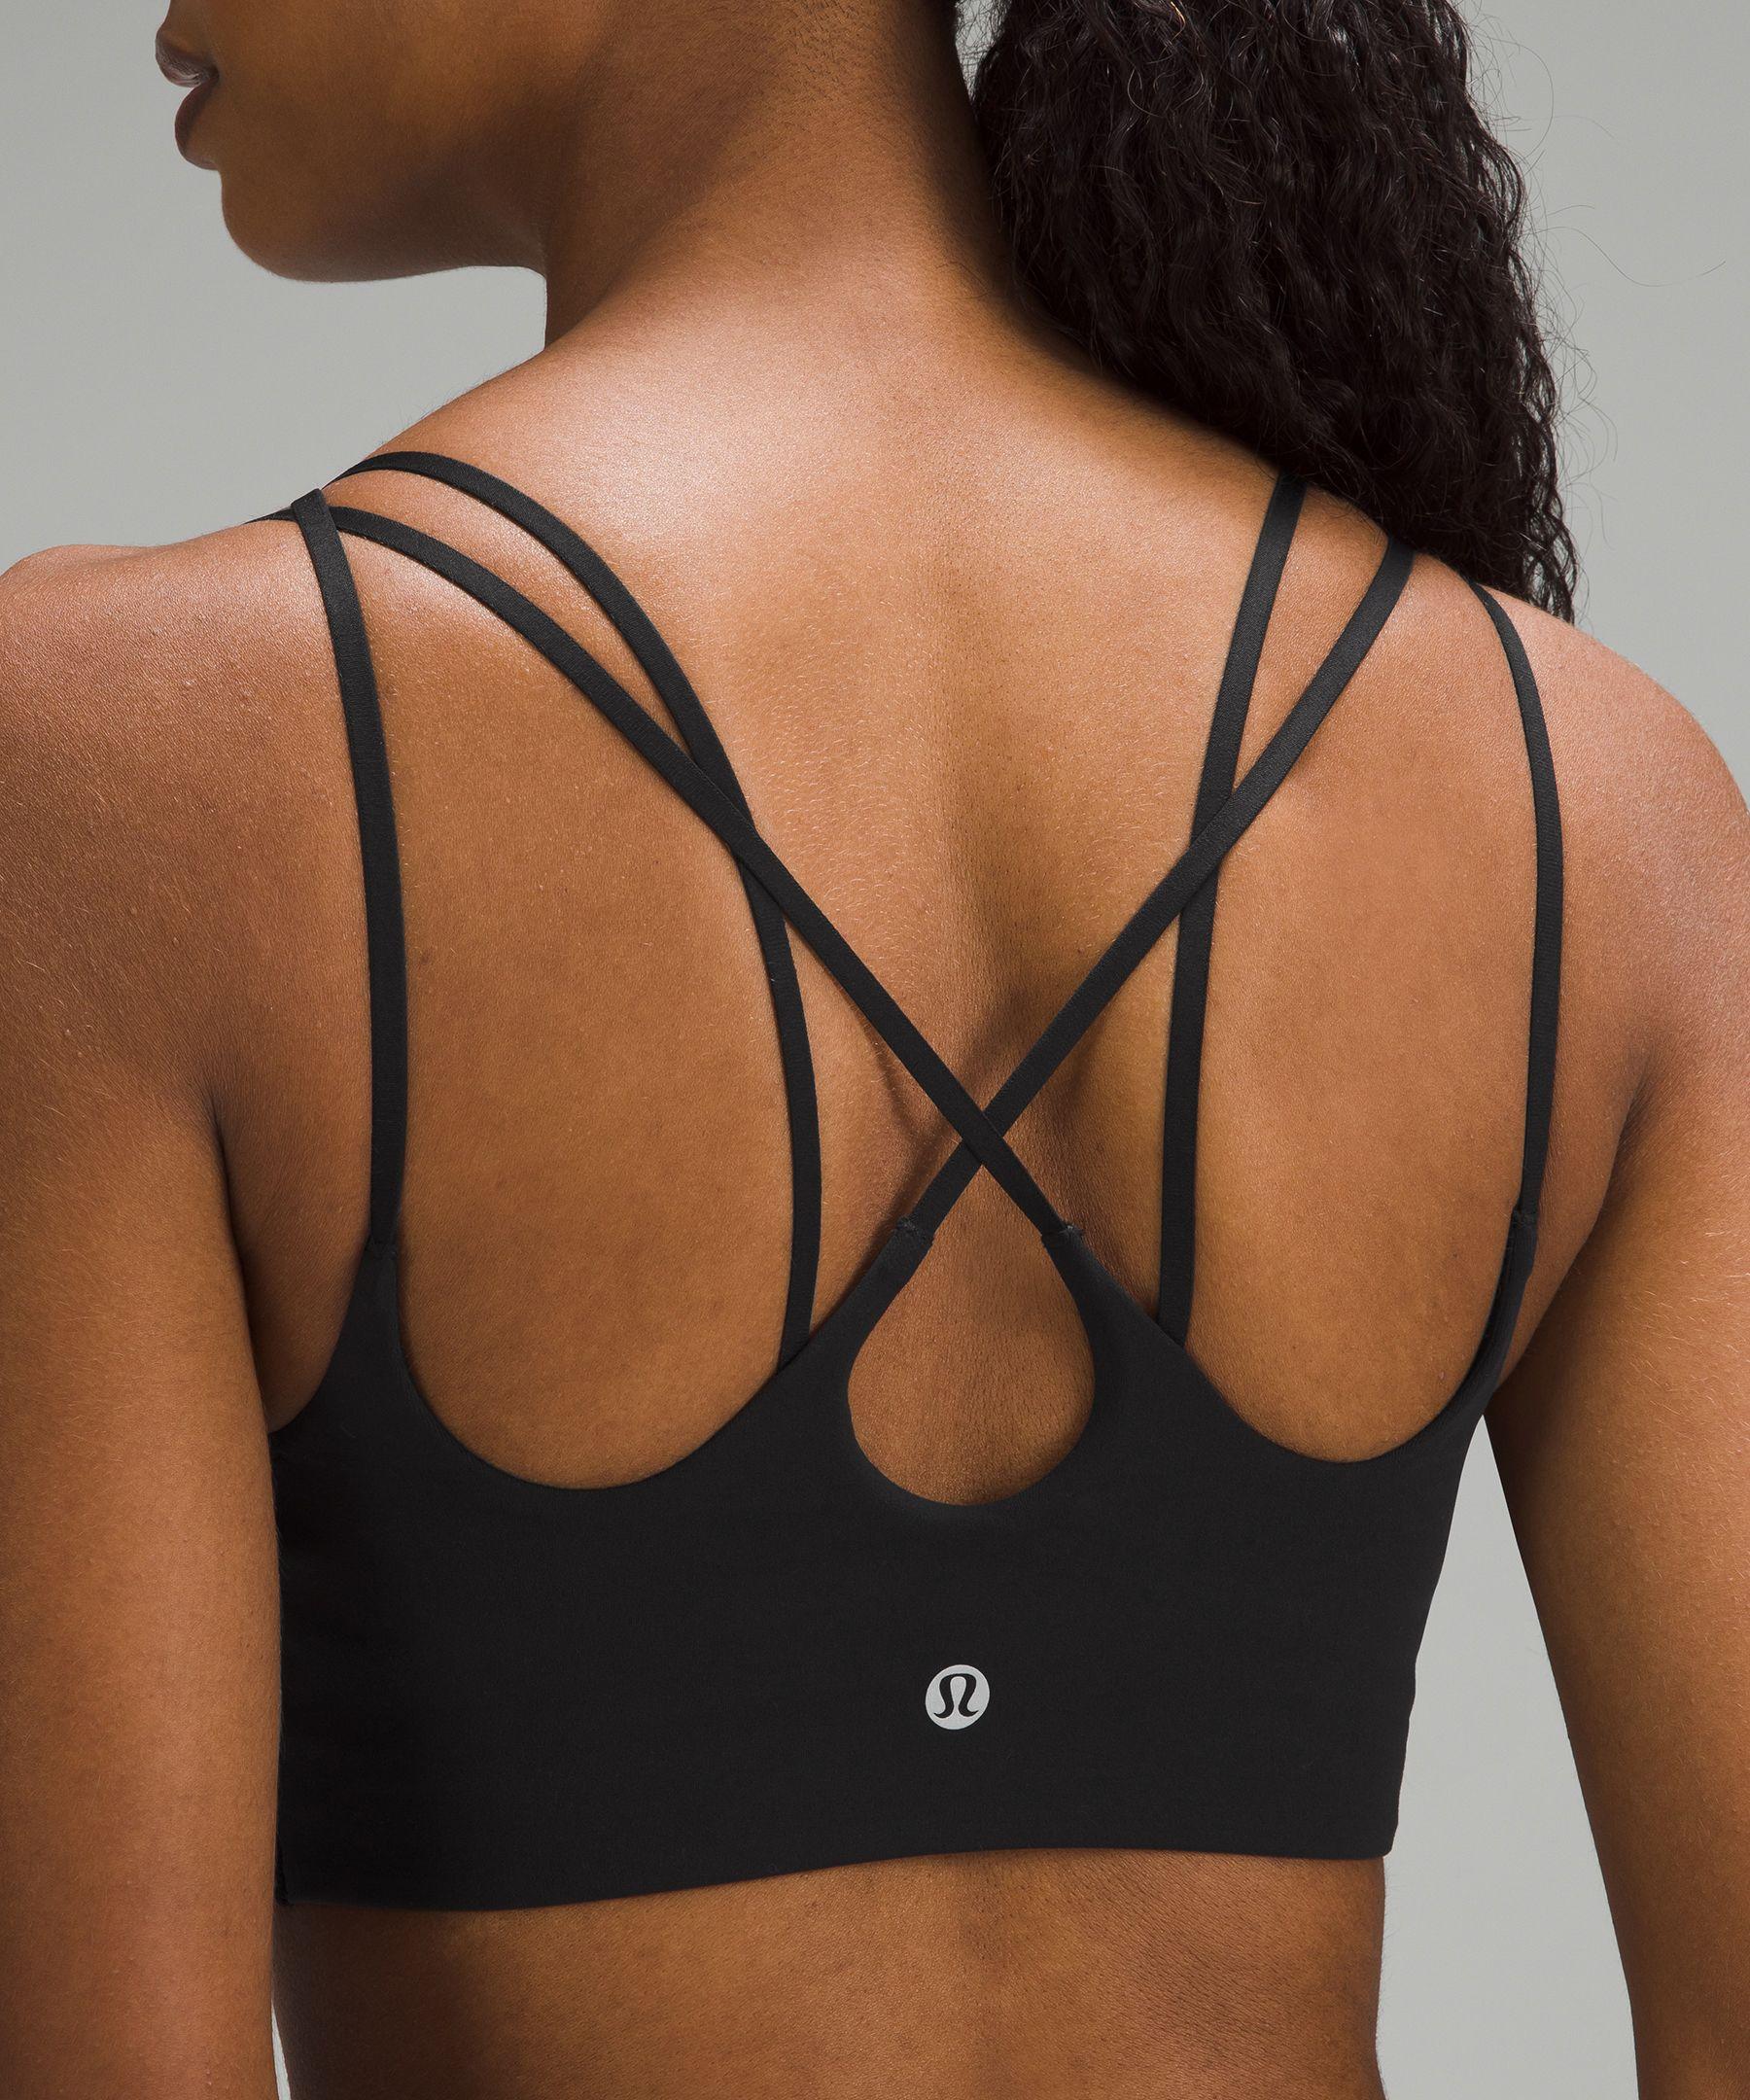 lululemon athletica Nulu Strappy Yoga Bra Light Support, A/b Cup in Black